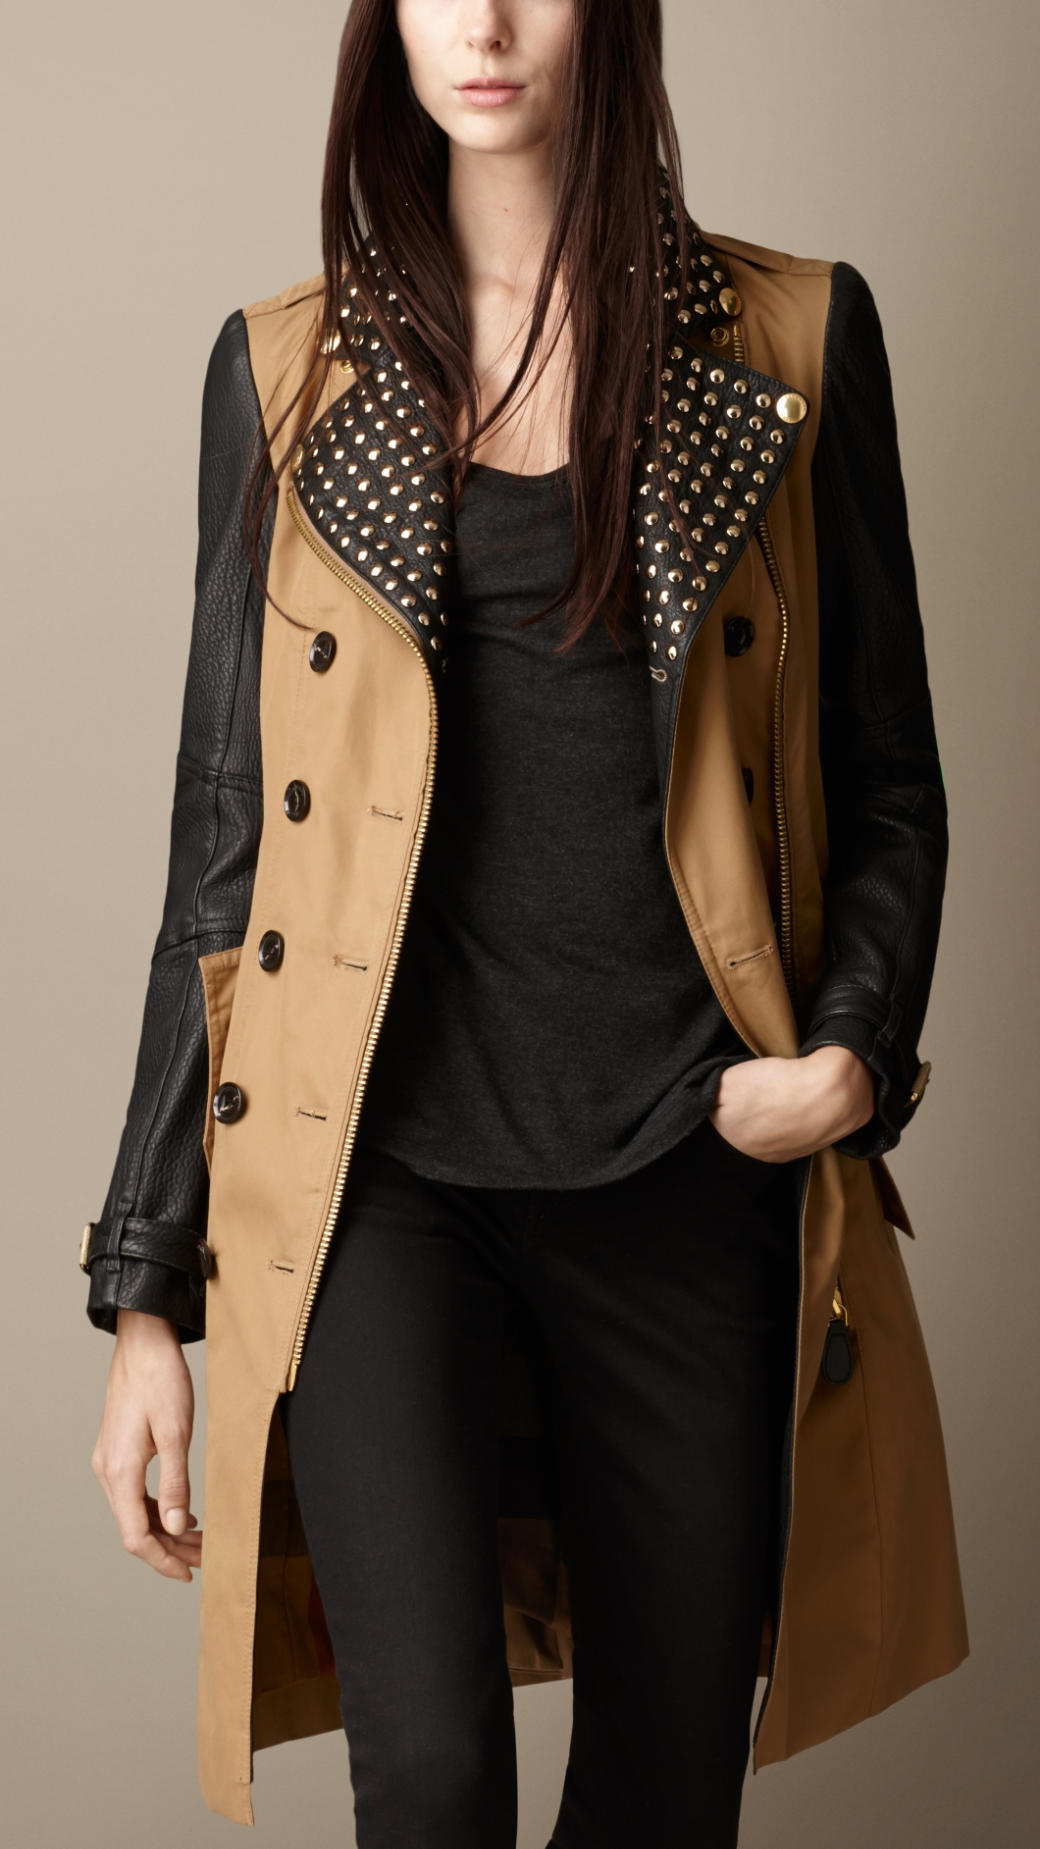 Lyst - Burberry Studded Leather Biker Trench Coat in Brown